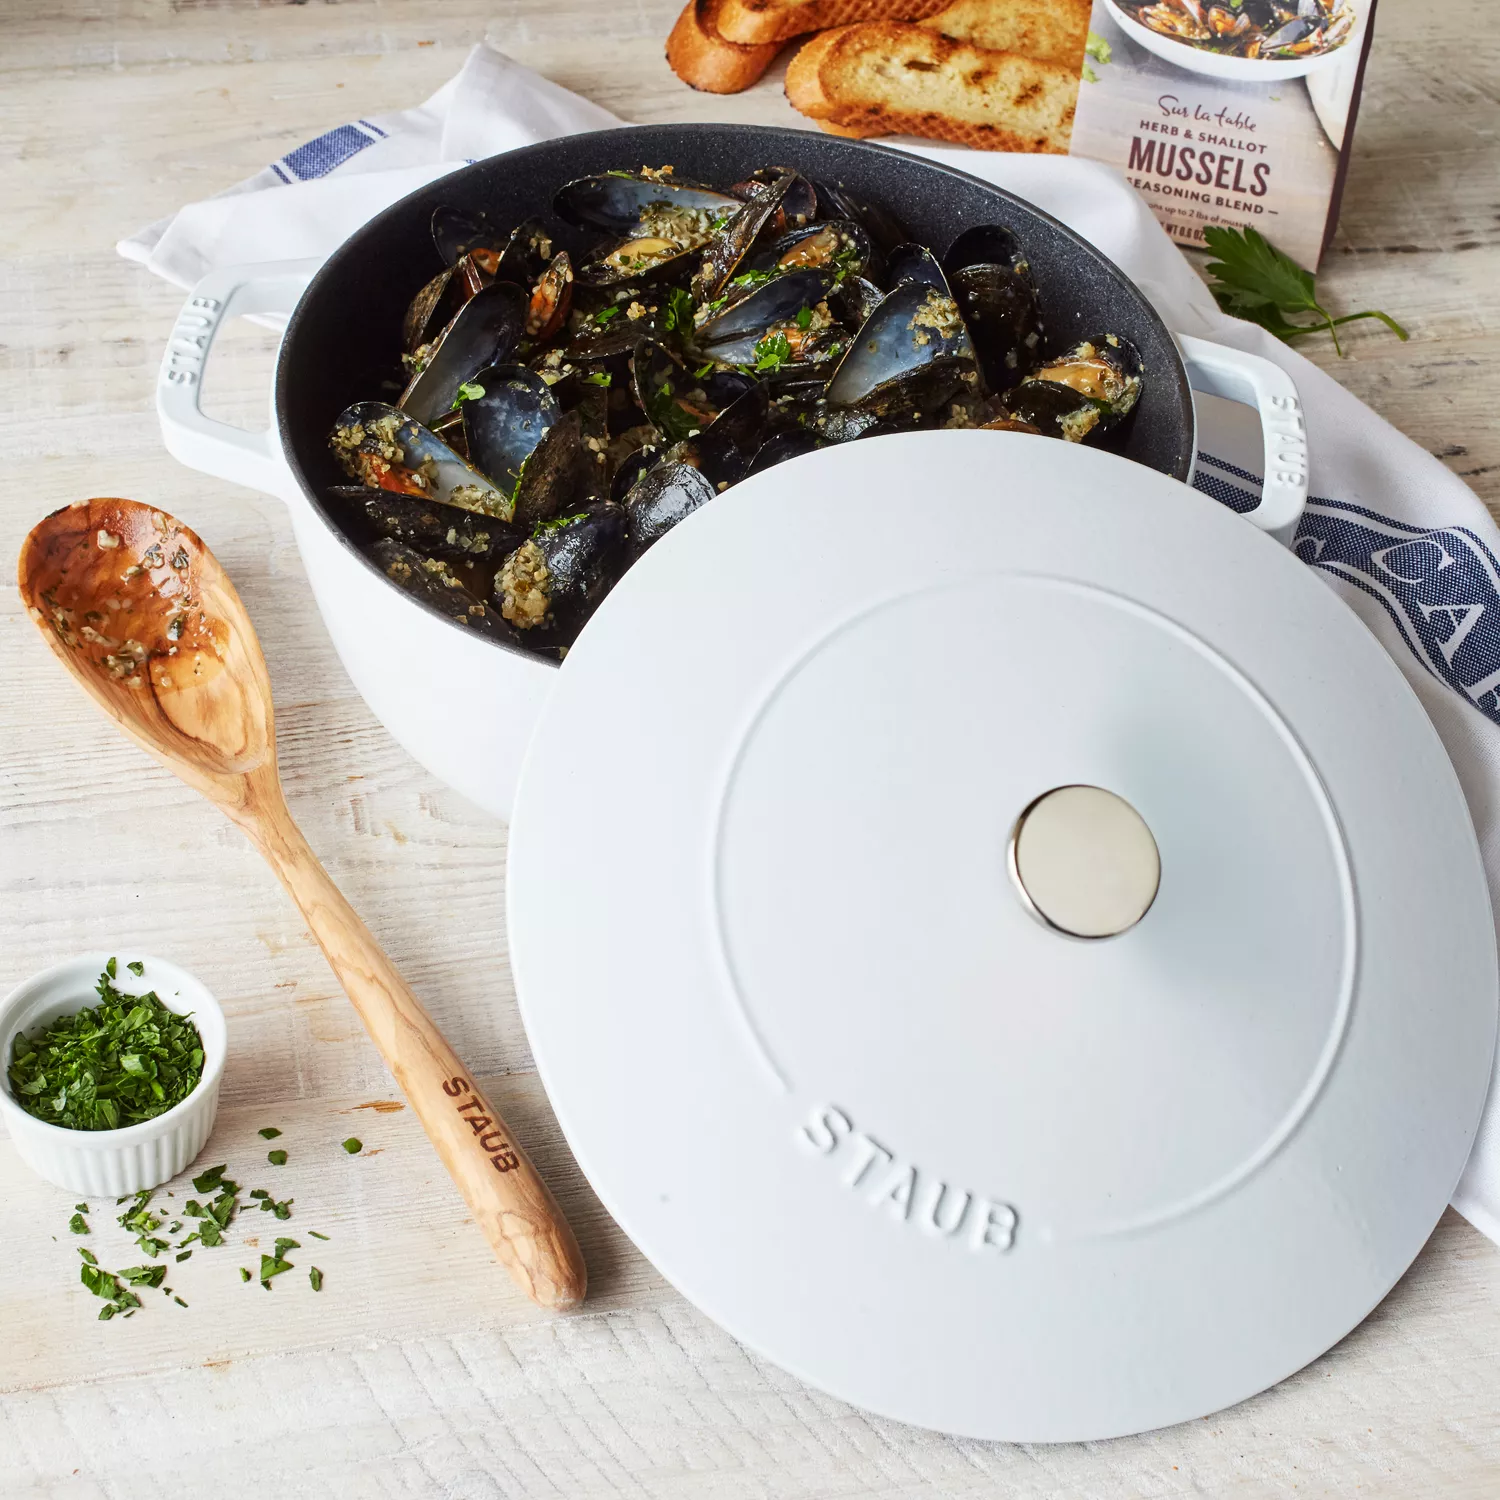 Staub Enameled Cast Iron 3.75 Qt Essential French Oven in White